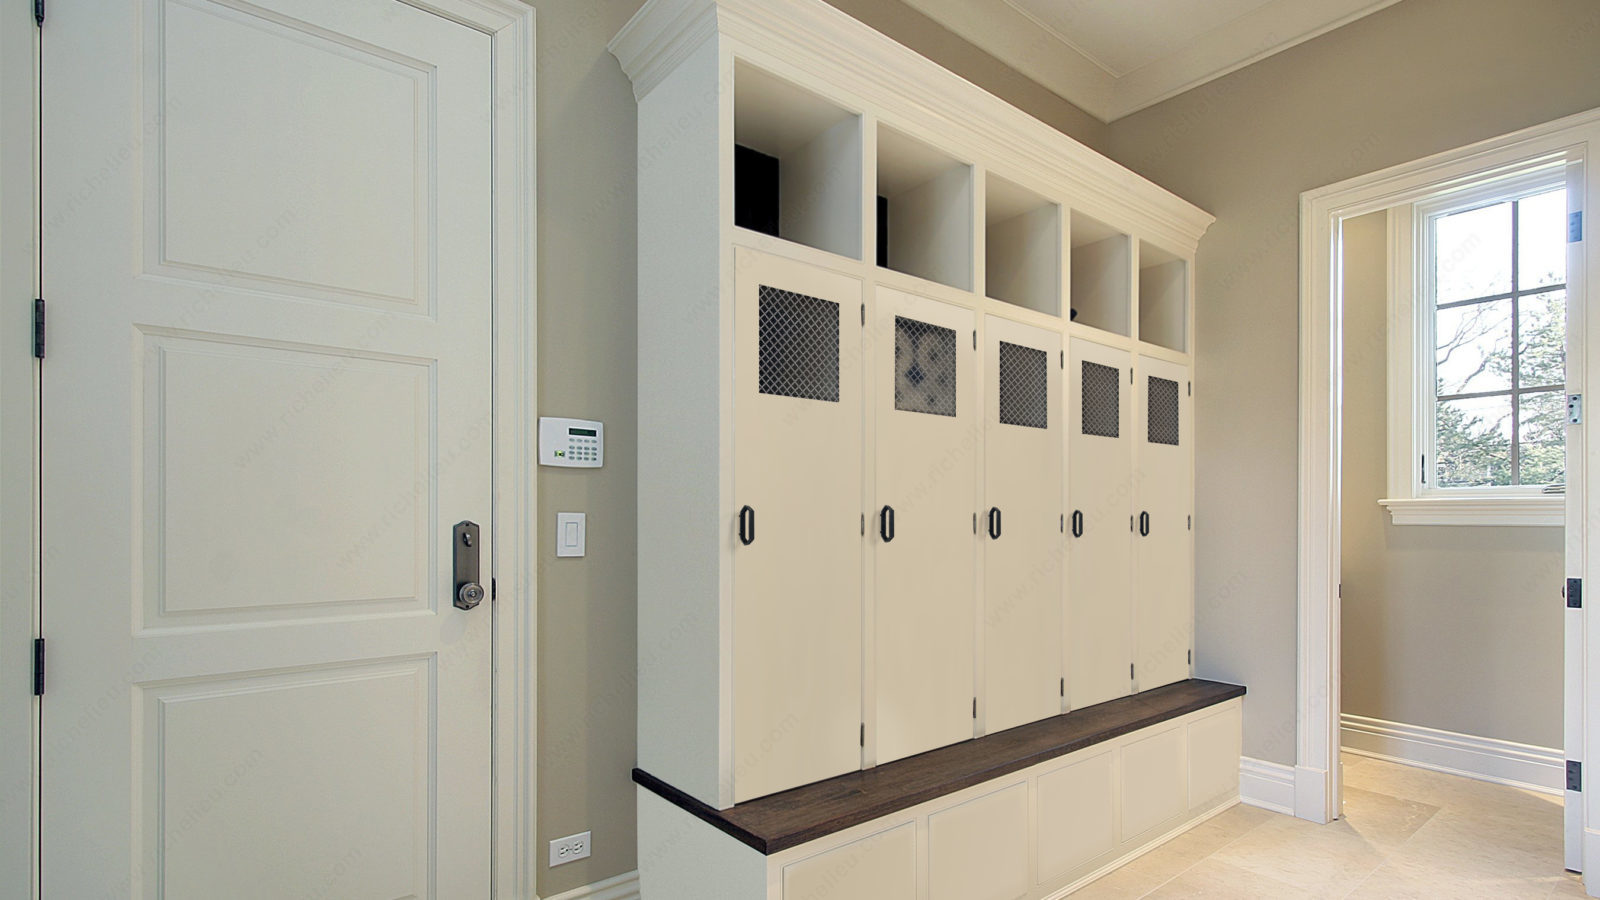 Bring your MUDROOMS and ENTRYWAY to the next level